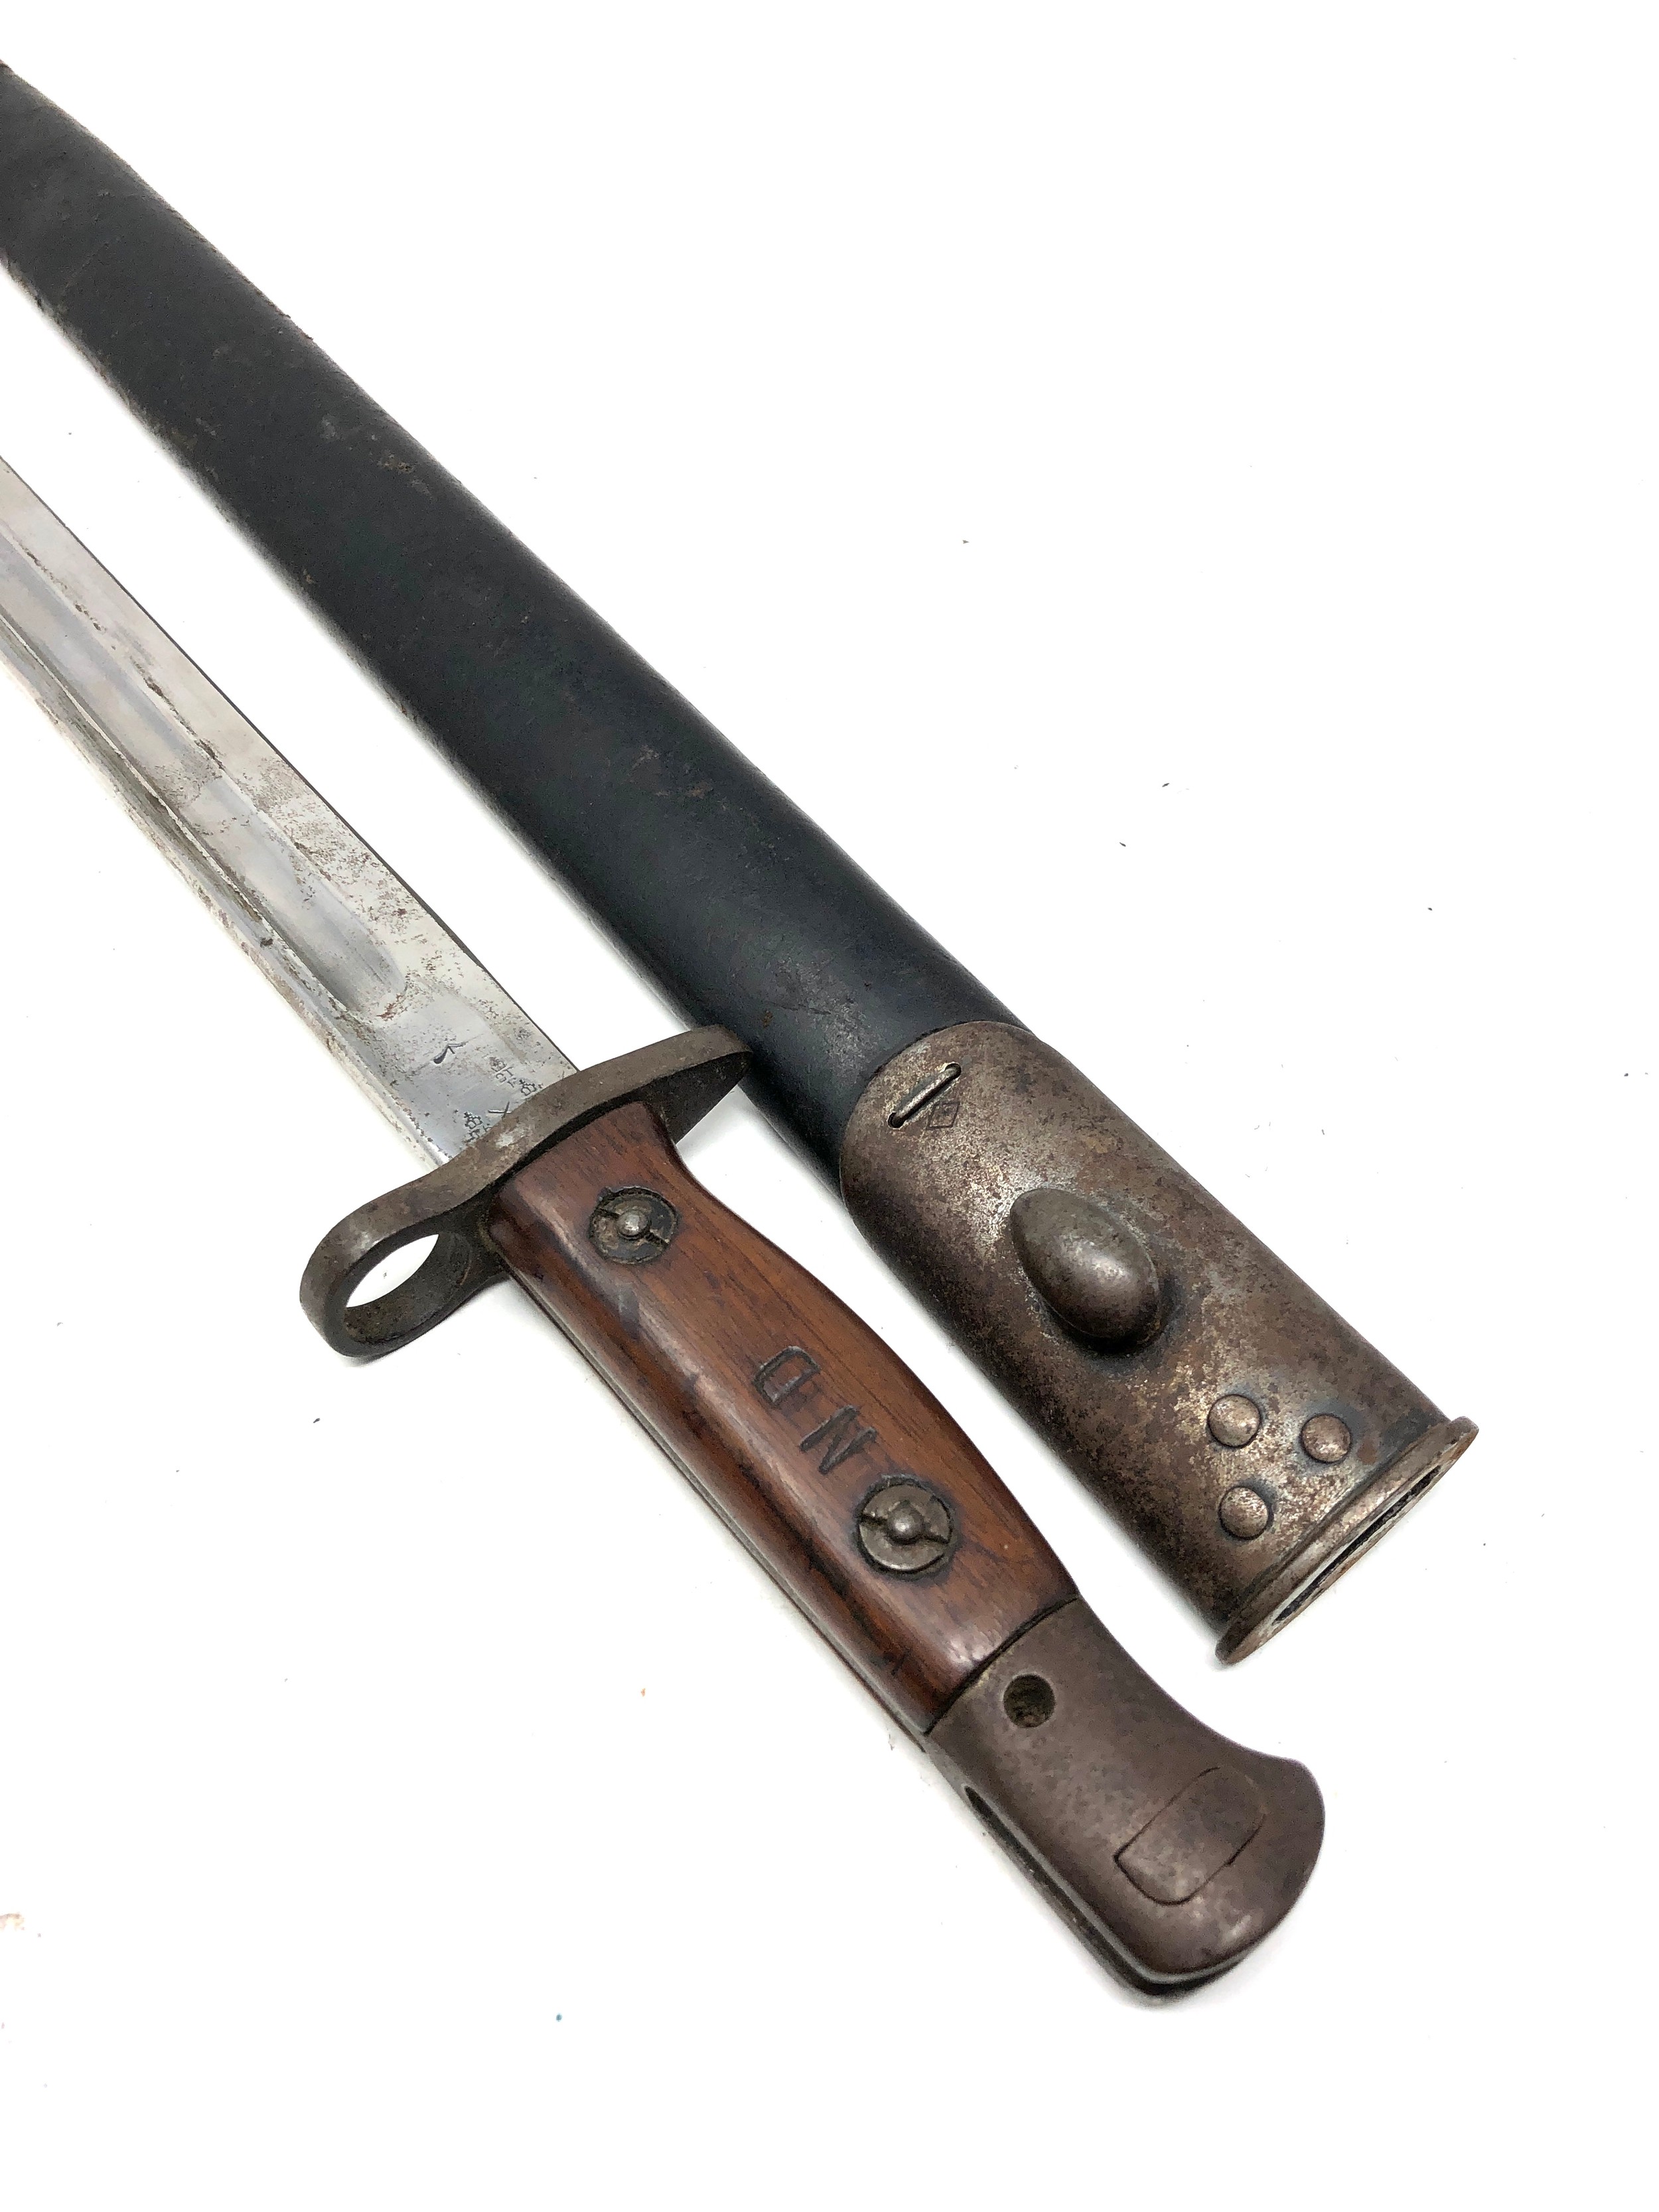 1907 sanderson bayonet and scabbard - Image 3 of 6